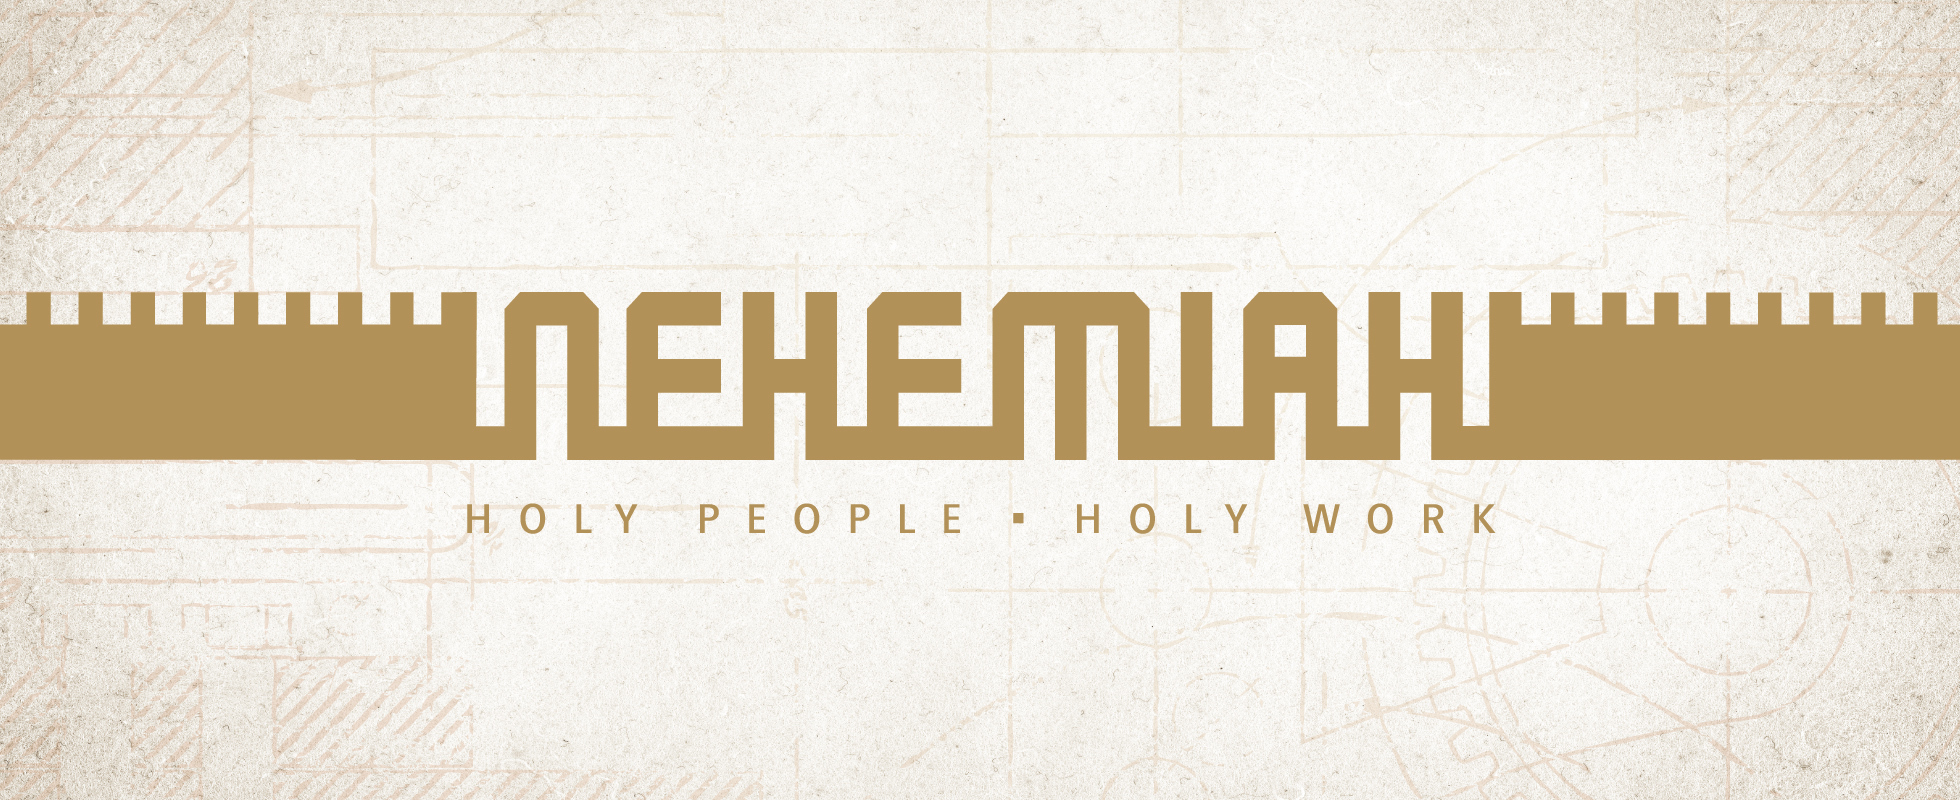 Header Image for Jesus’ People Restored for the Good of the City